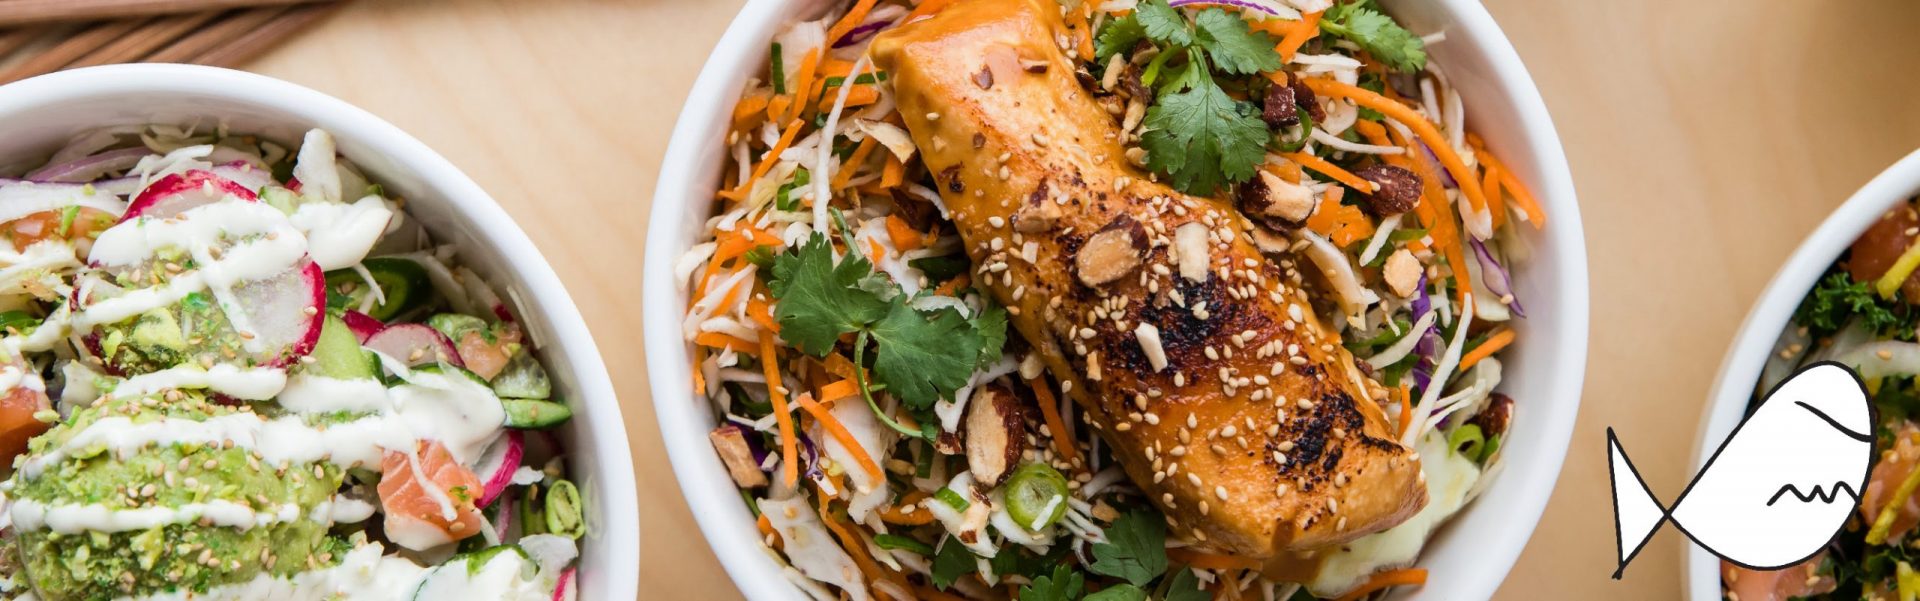 DEAL: Fishbowl - 20% off Orders with $10 Minimum Spend via Deliveroo (until 7 July 2022) 24